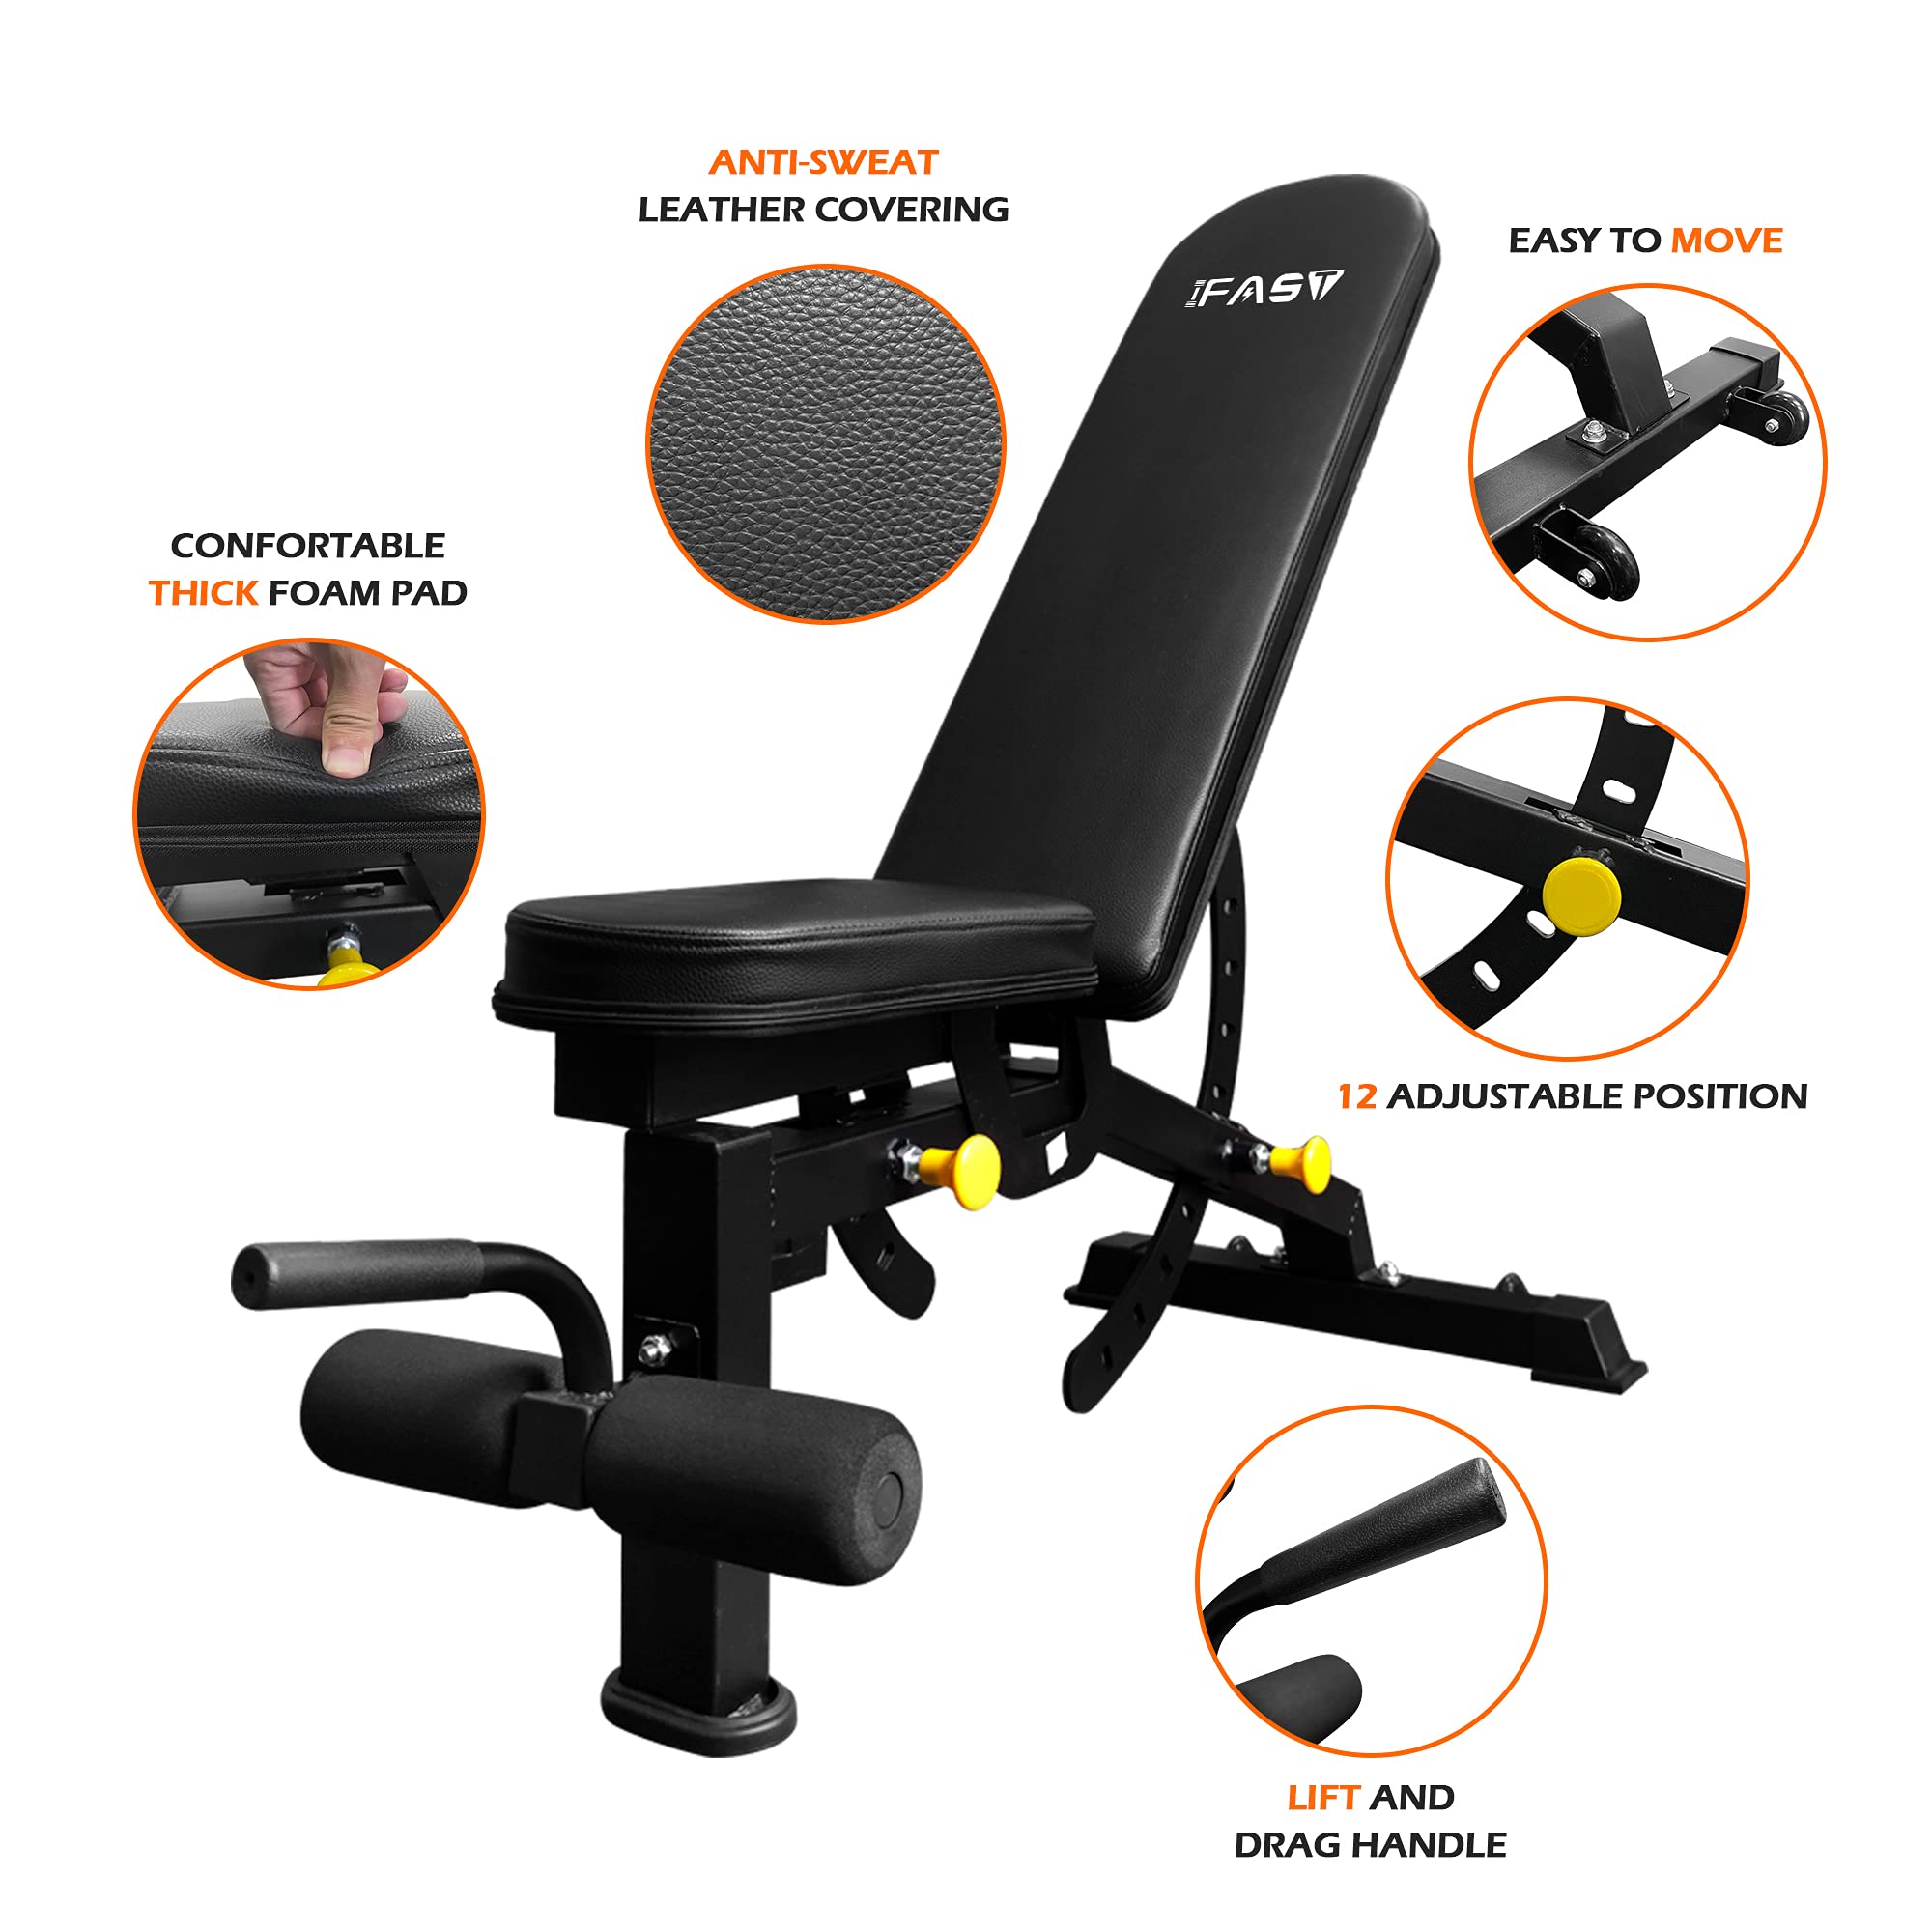 IFAST weight bench advantages